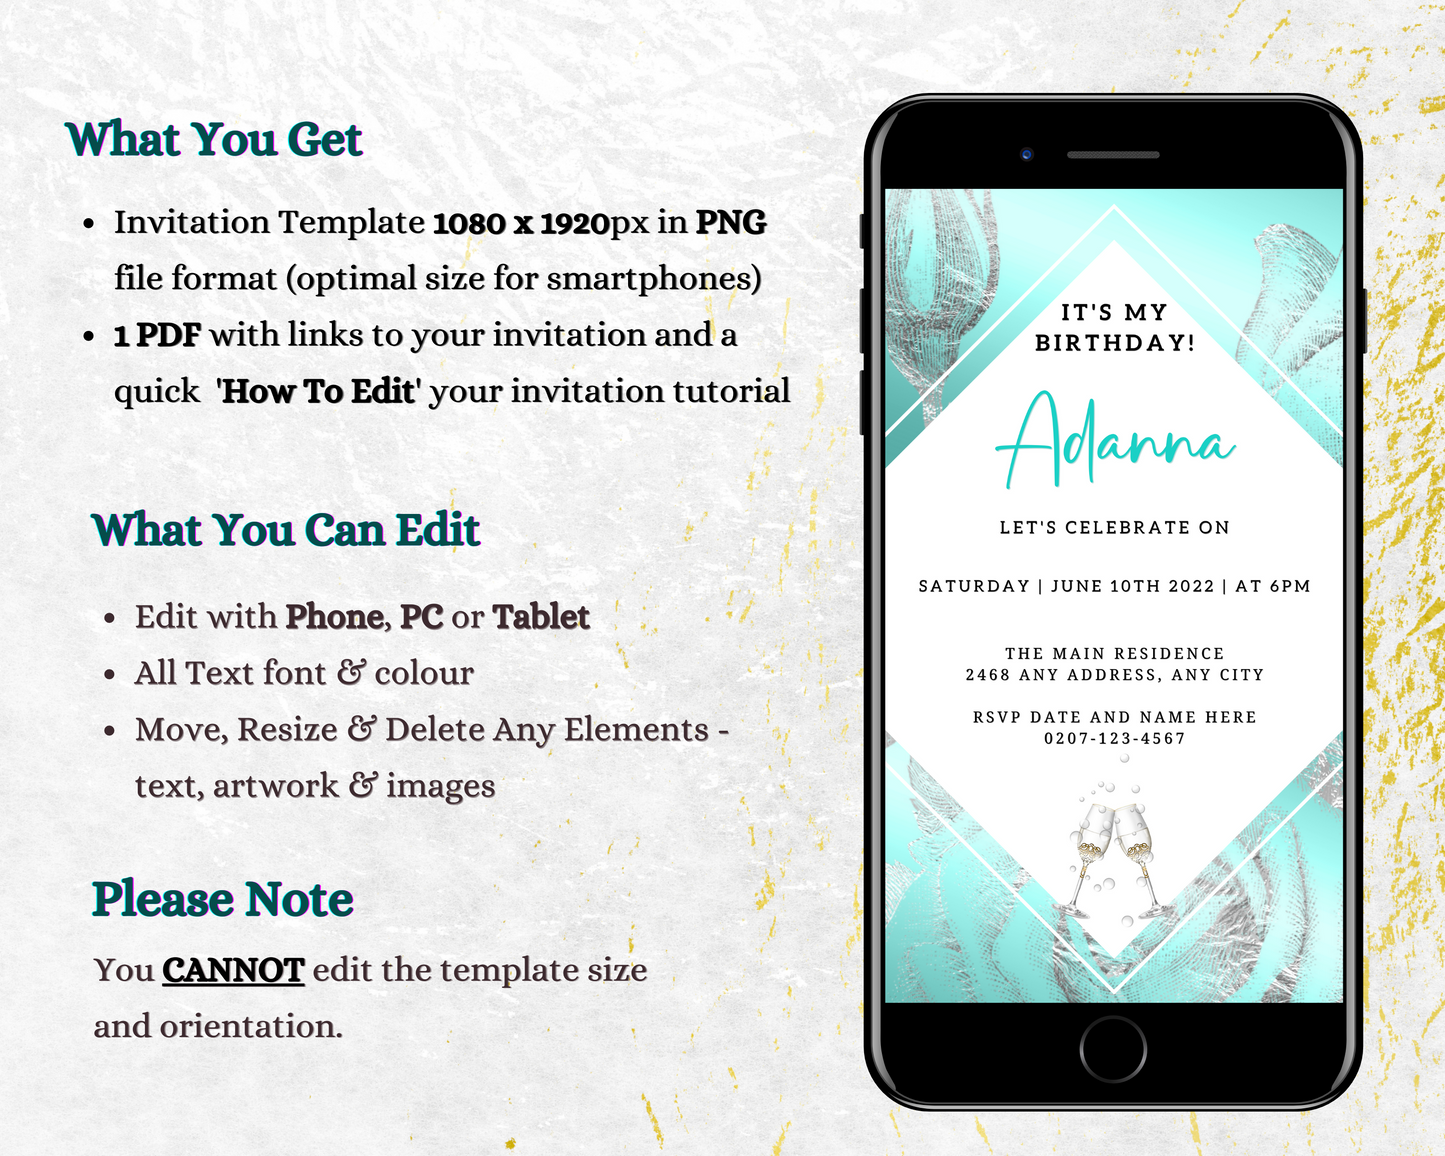 Teal White Silver Floral Customisable Birthday Evite displayed on a smartphone screen, showcasing editable text for personalizing event details using Canva.